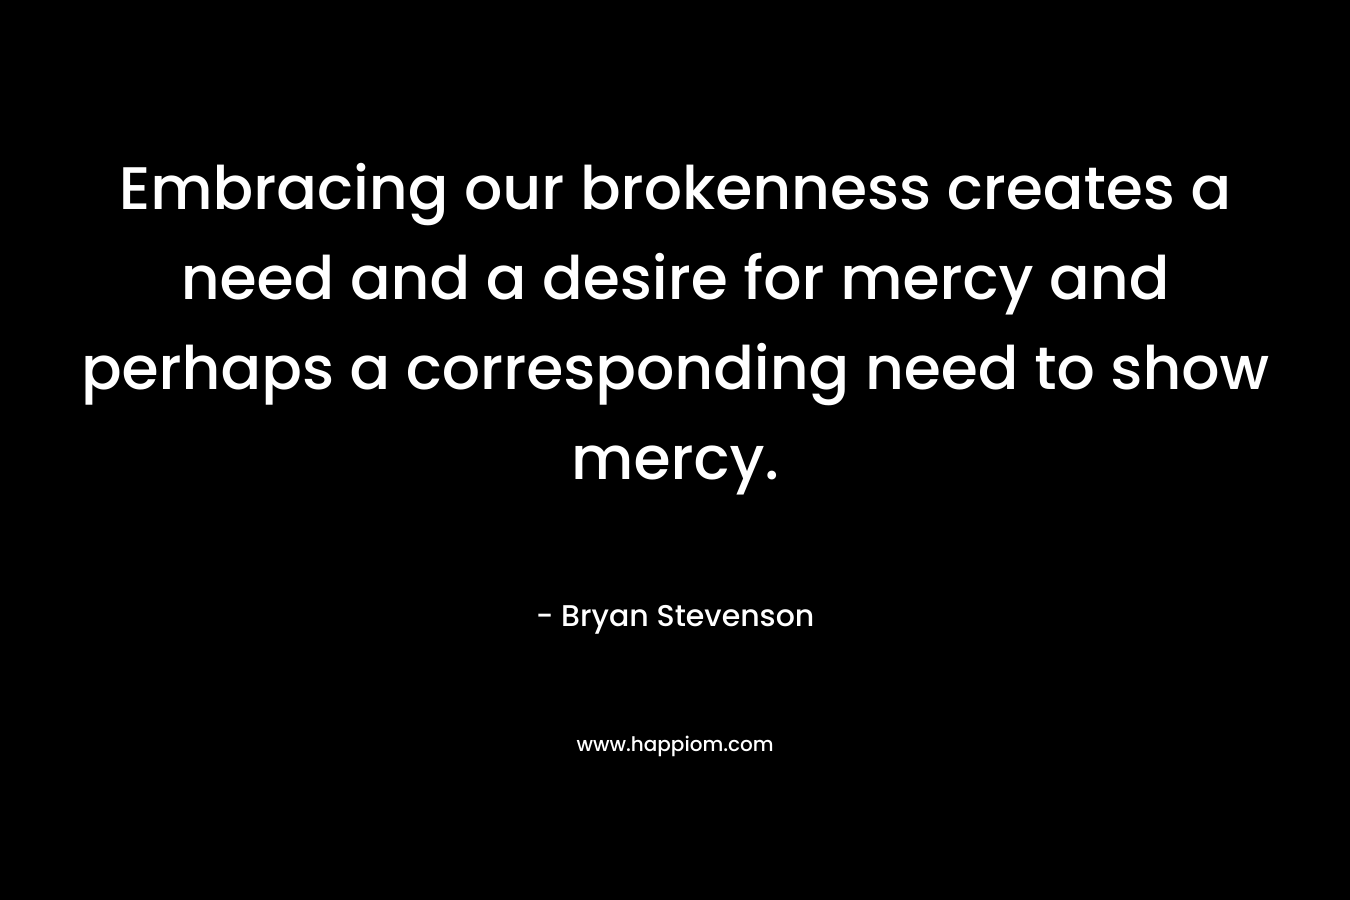 Embracing our brokenness creates a need and a desire for mercy and perhaps a corresponding need to show mercy. – Bryan Stevenson